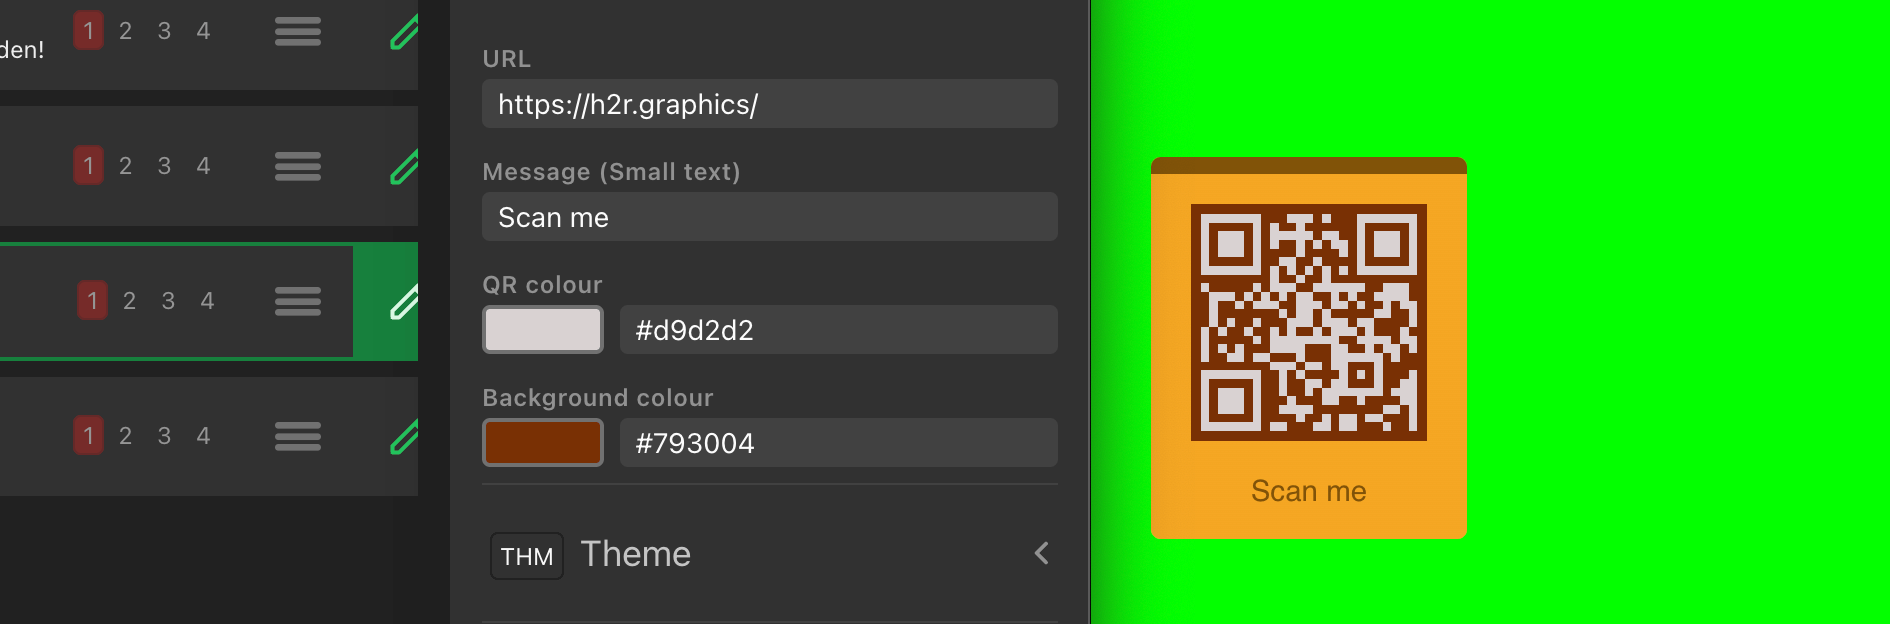 QR code with customisation